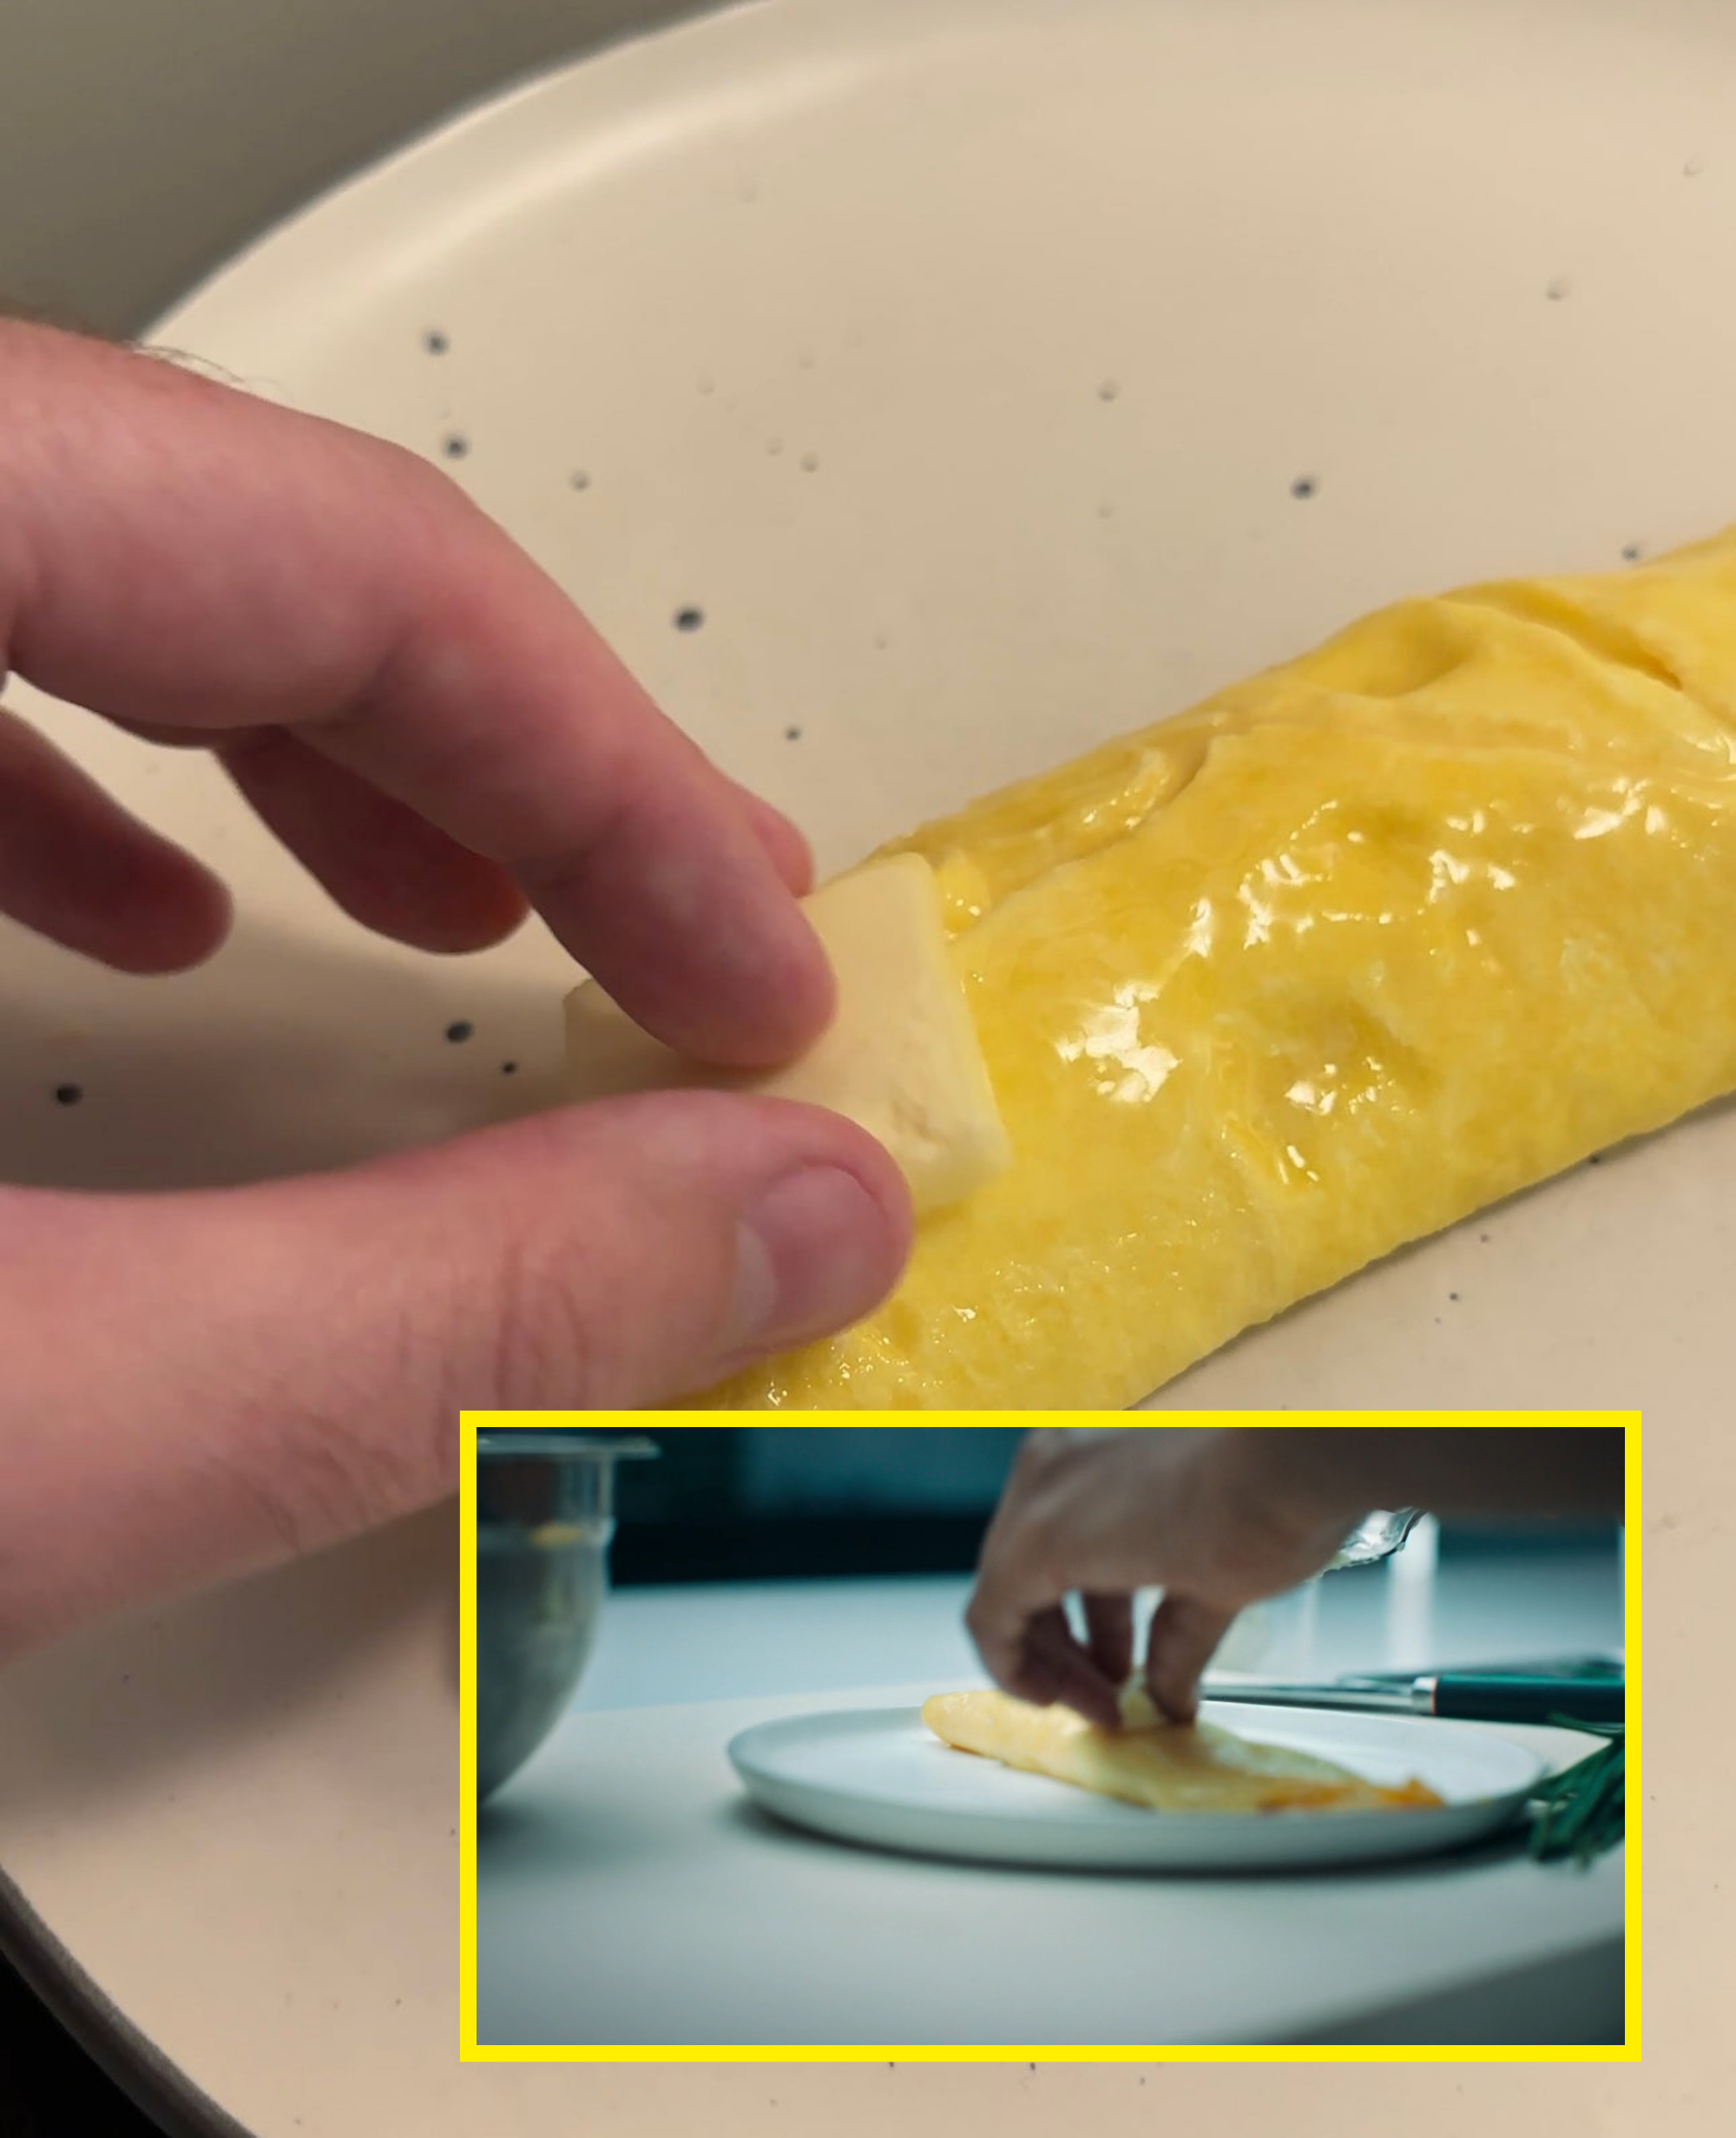 author putting butter on top of the omelet in contrast with Sydney doing the same in the episode